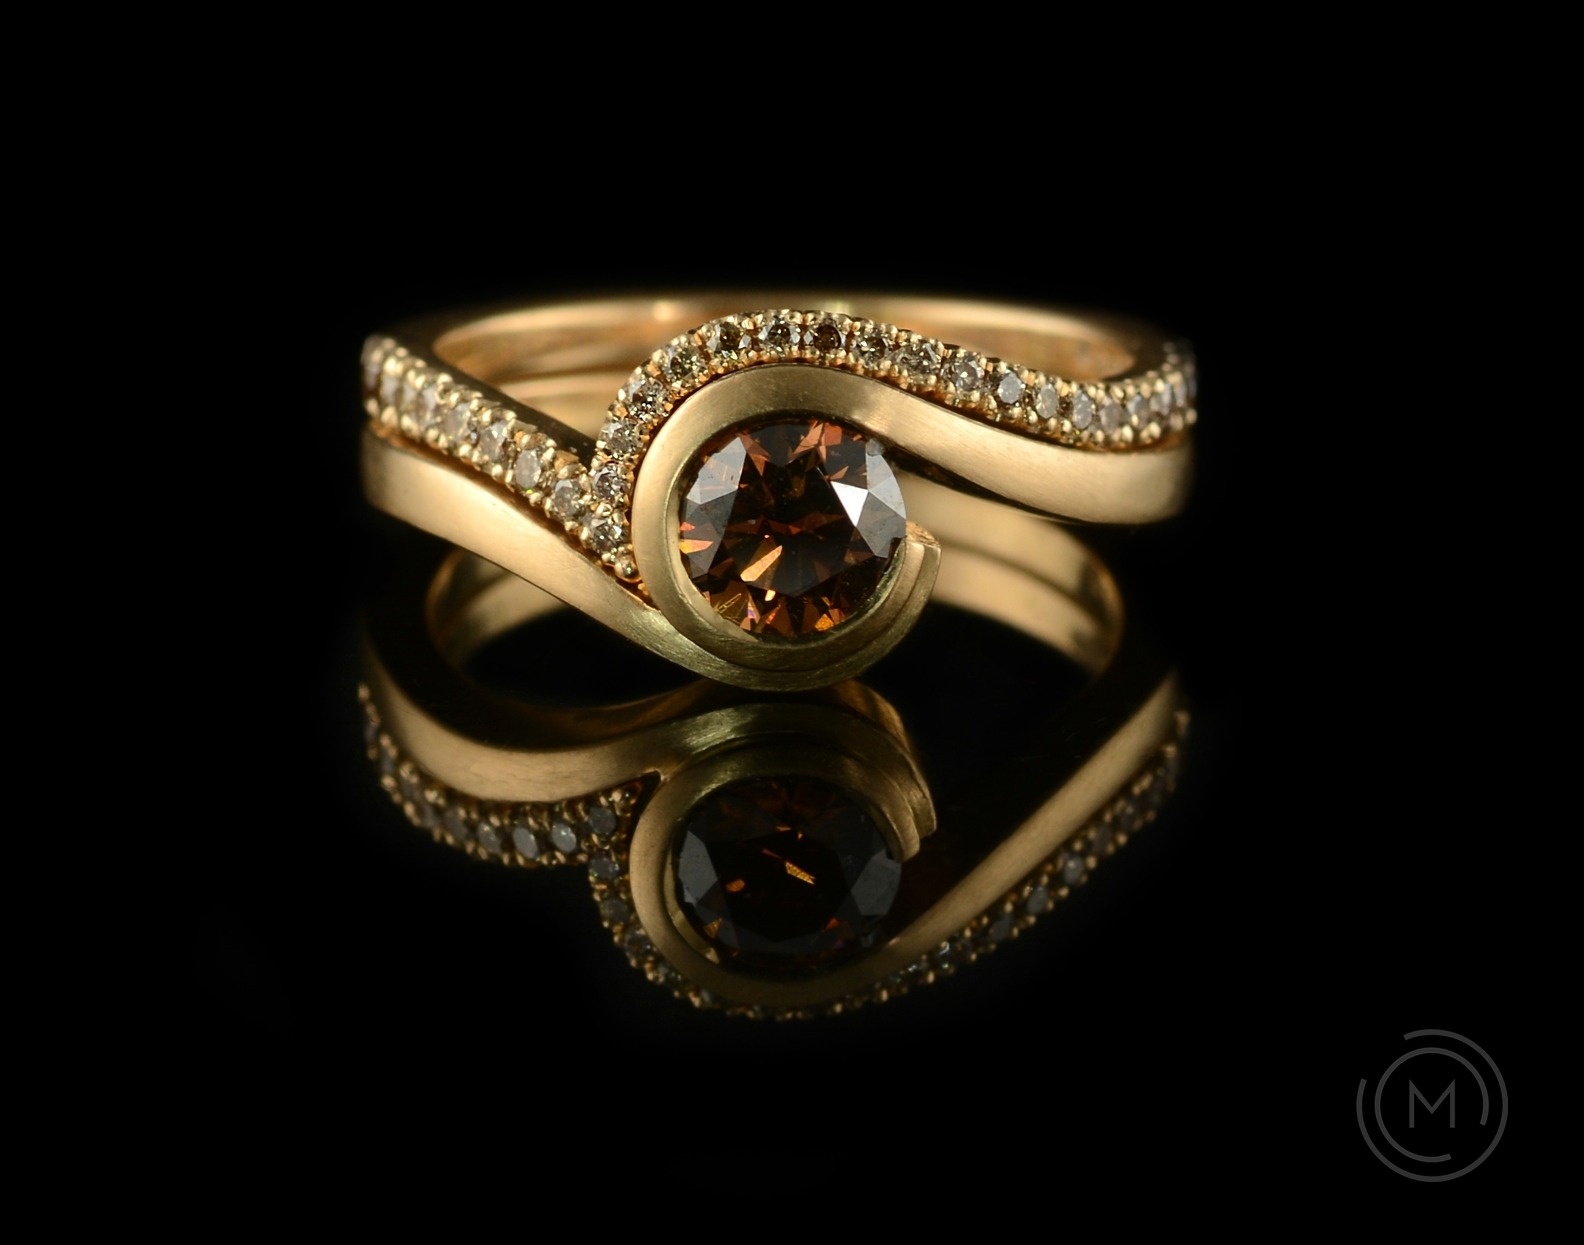 Wave fitted wedding ring made from 18 carat rose gold and cognac diamonds